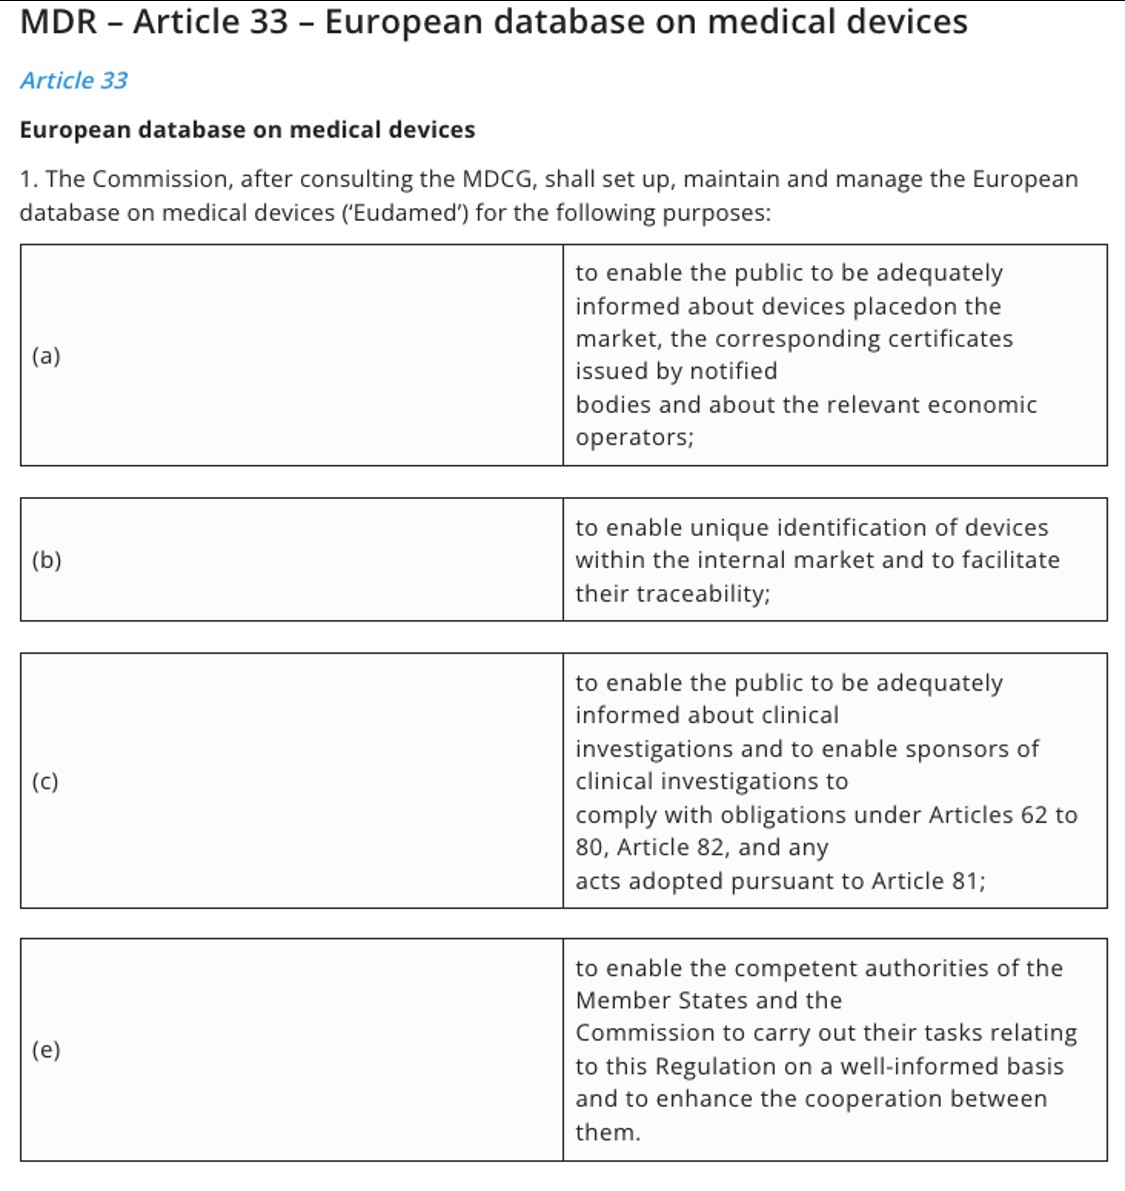 Figure 4: Article 33 – European database on medical devices, accessed November 2022 [3]